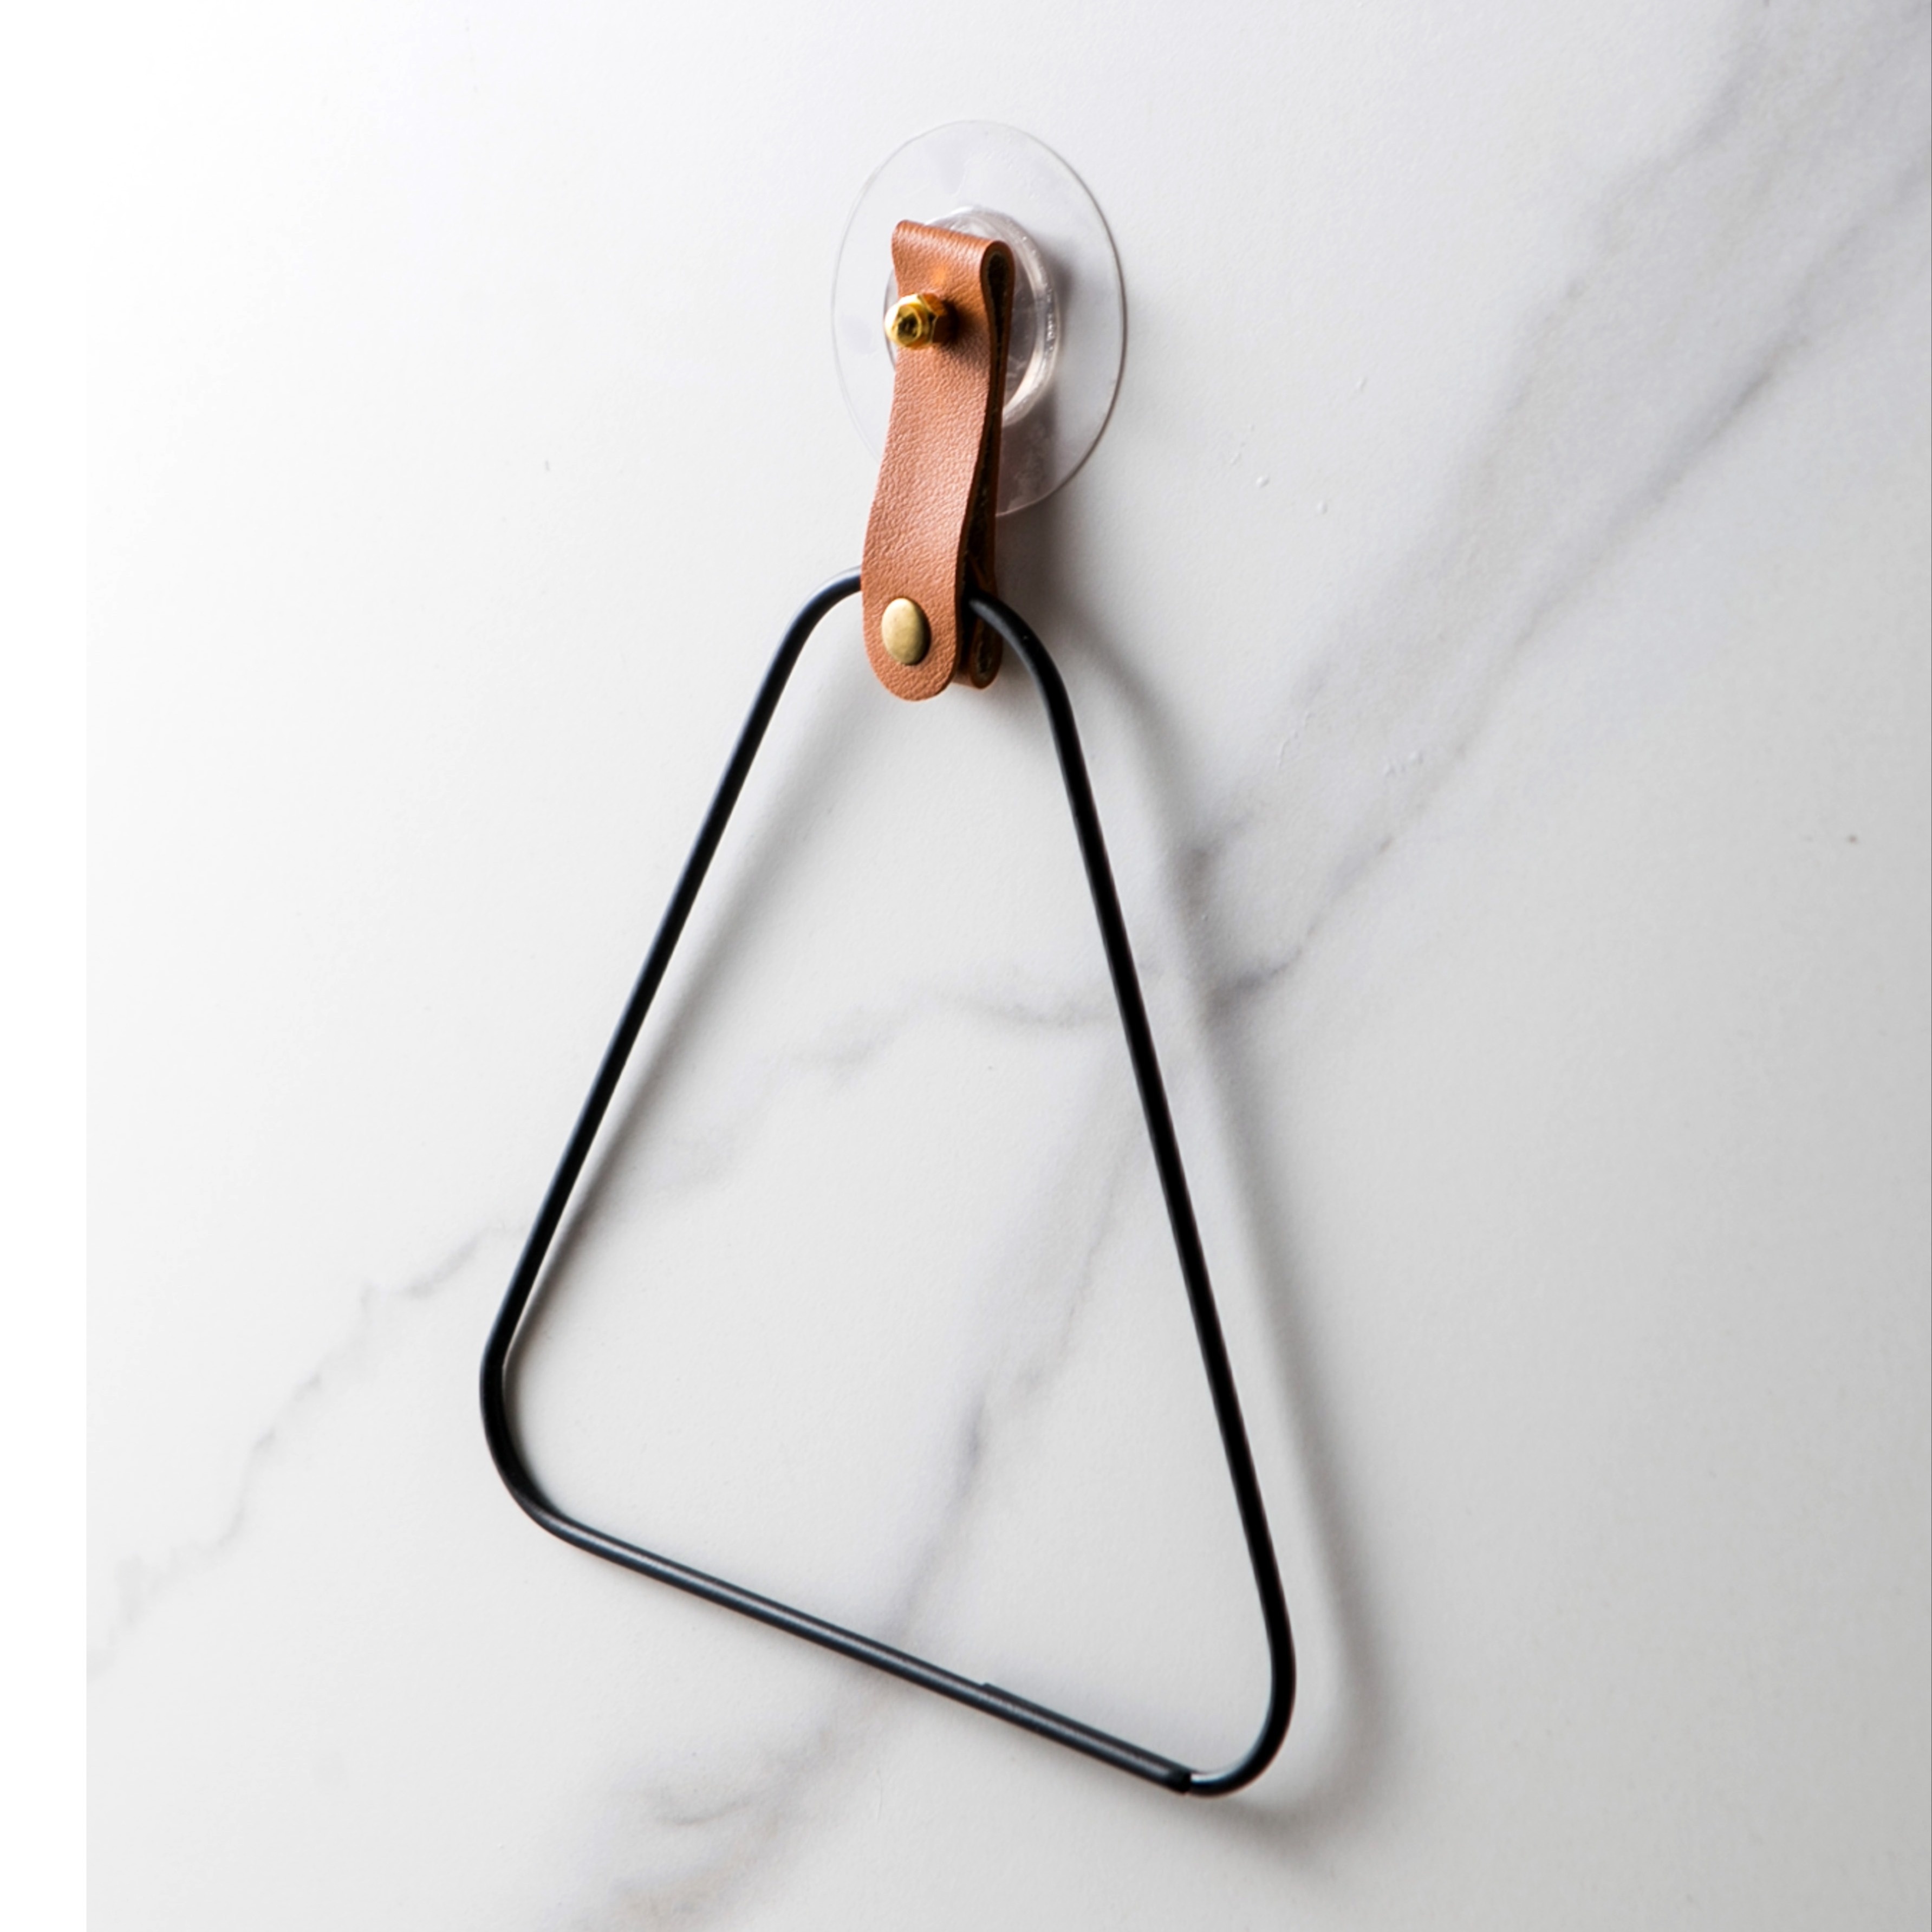 1pc Iron Paper Towel Holder, Creative Triangle Hanging Paper Towel